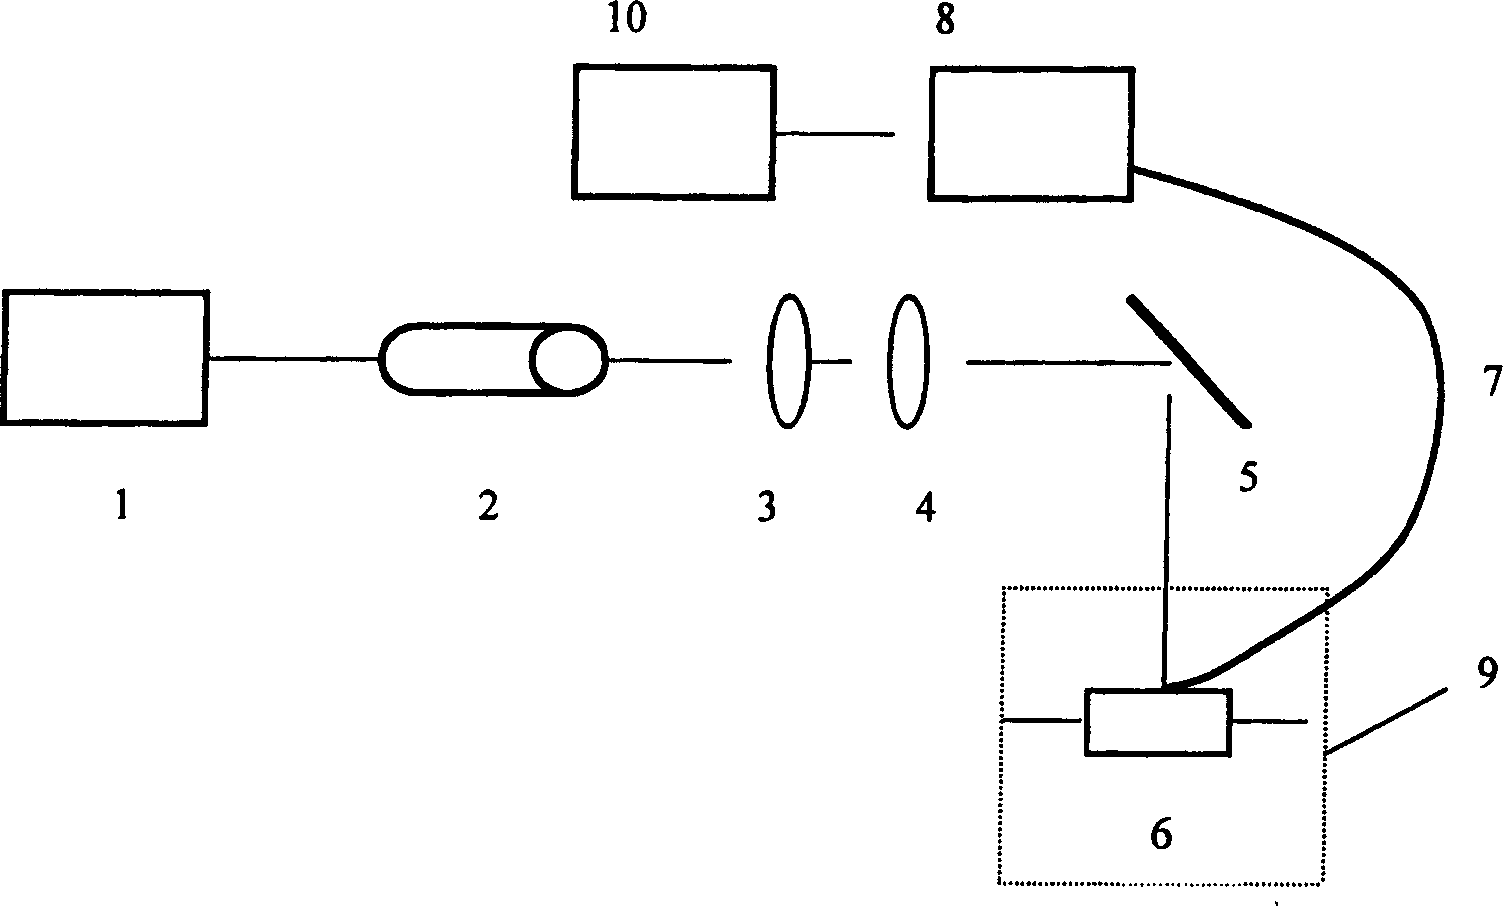 A light scattering detector and capillary tube electrophoresis device for the detector